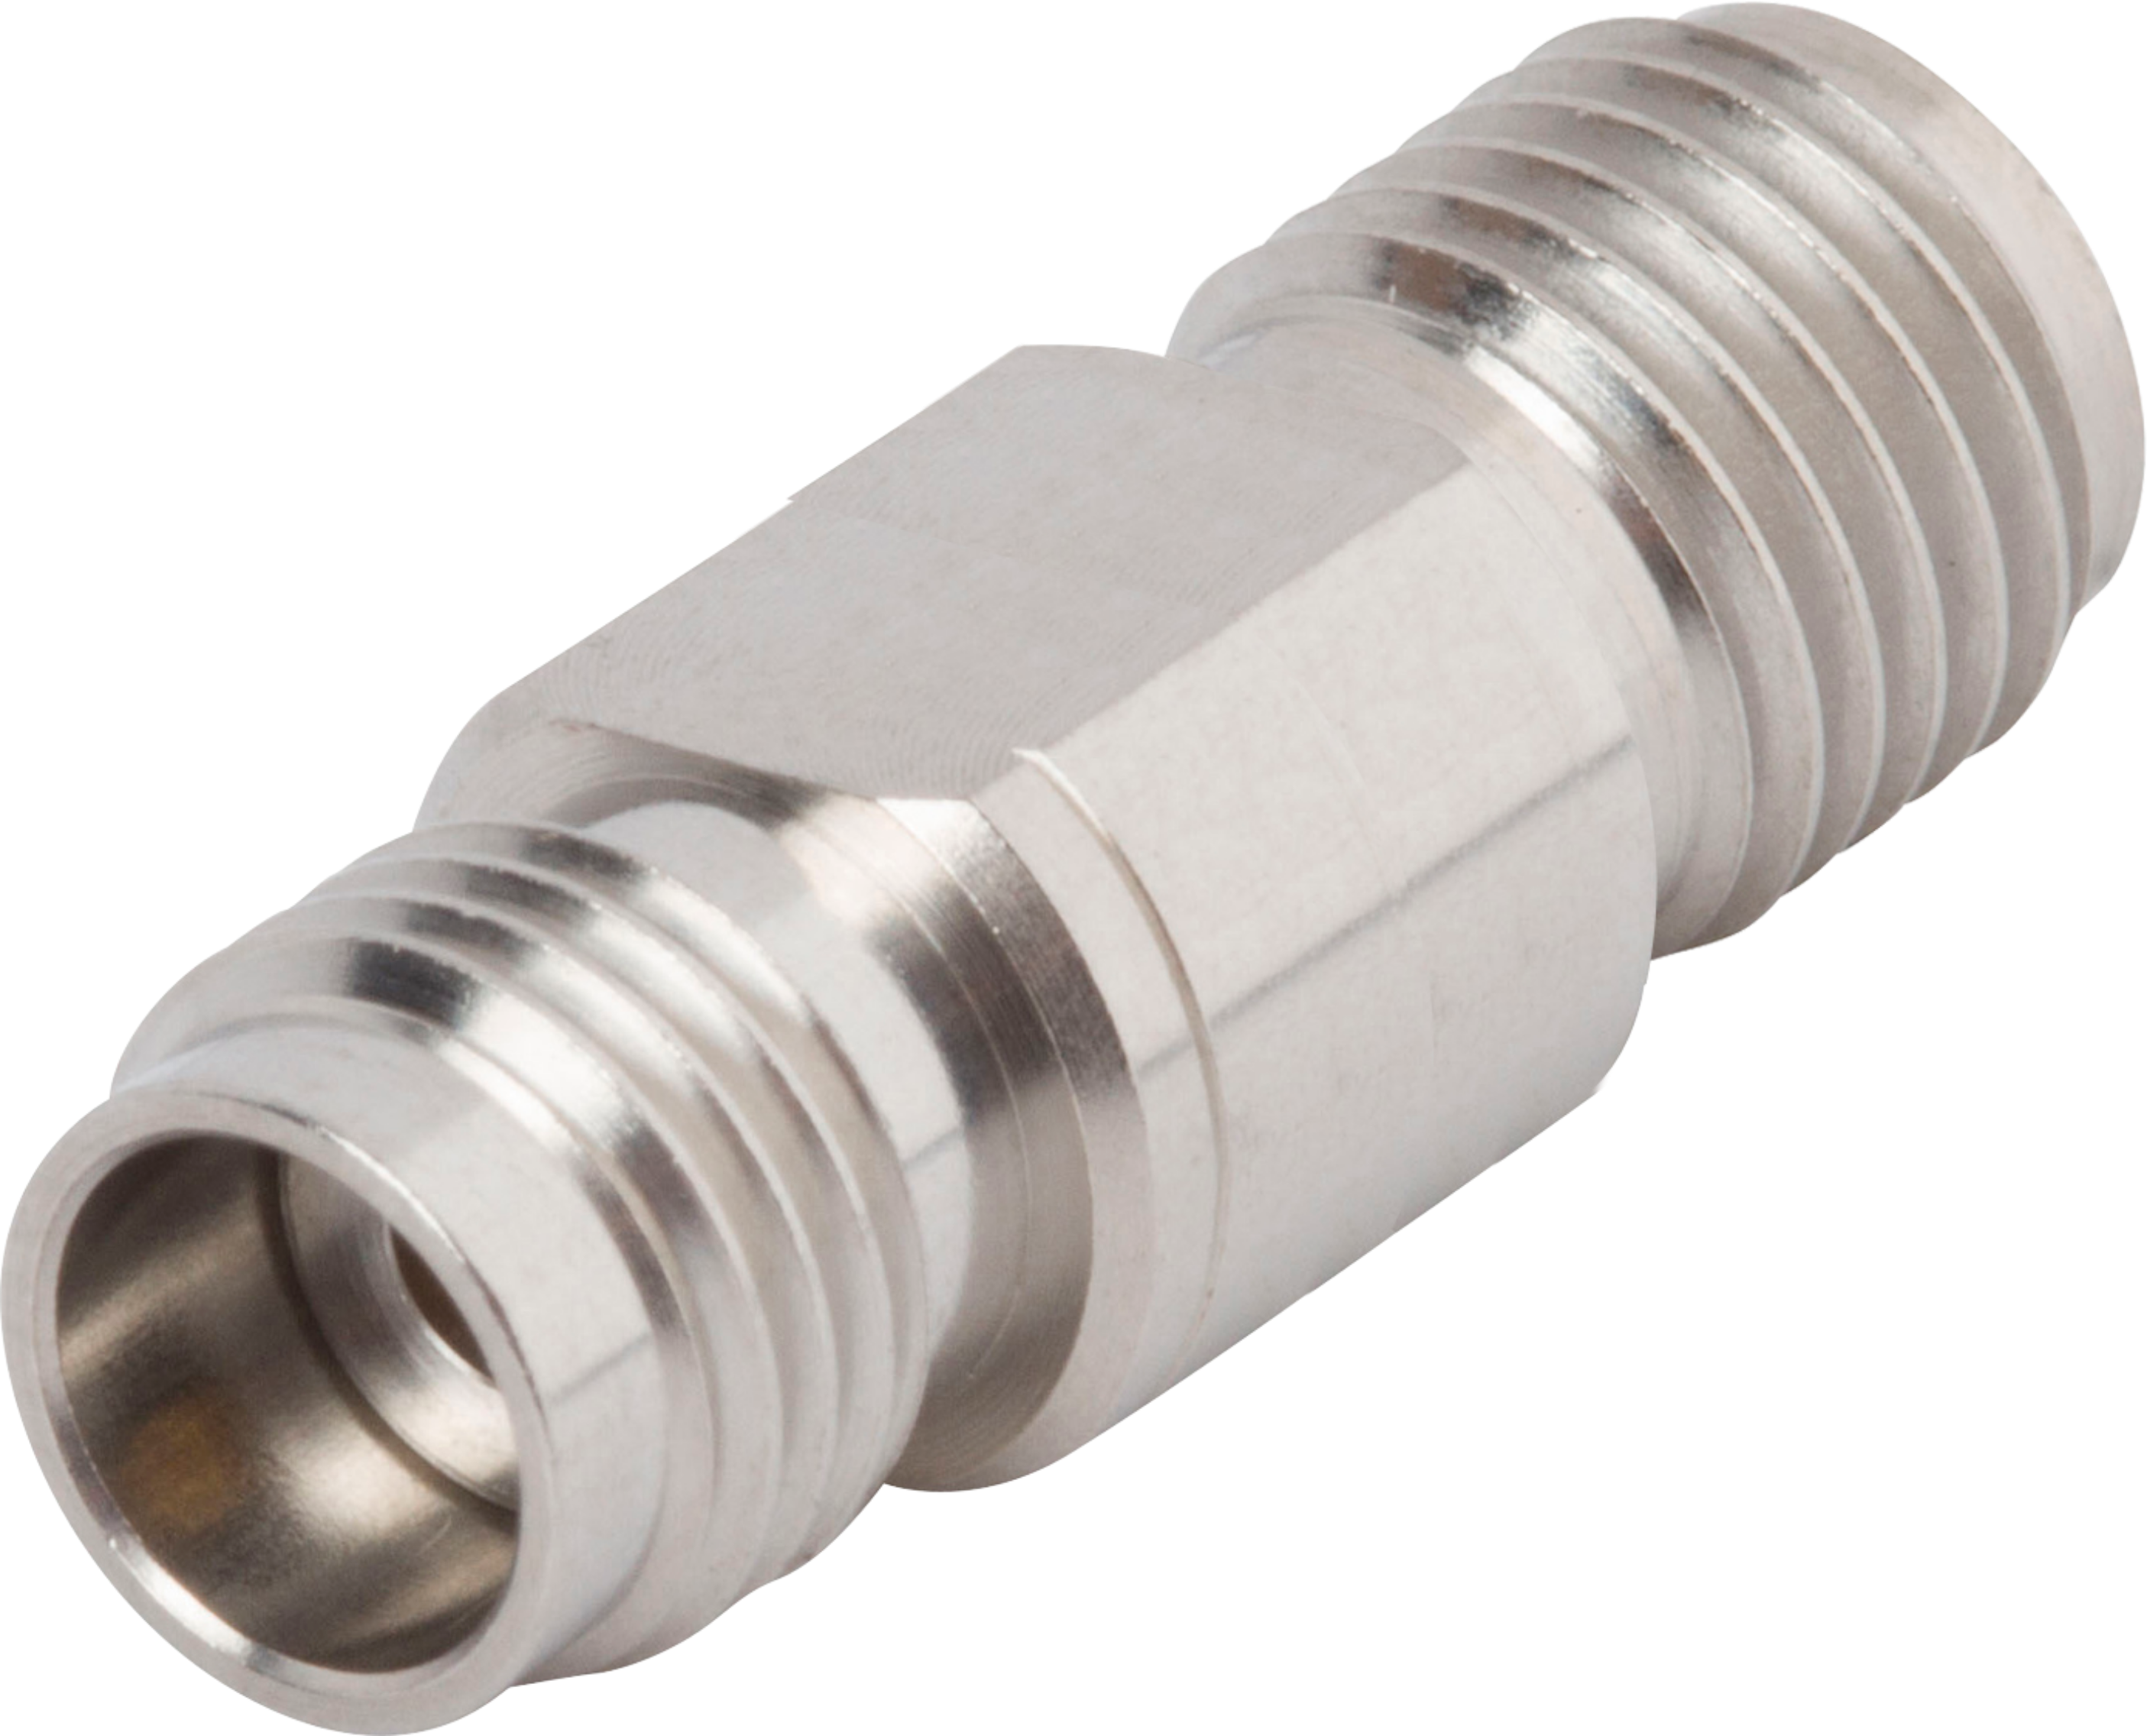 2.4mm Female to 2.92mm Female Adapter, SF1116-6004